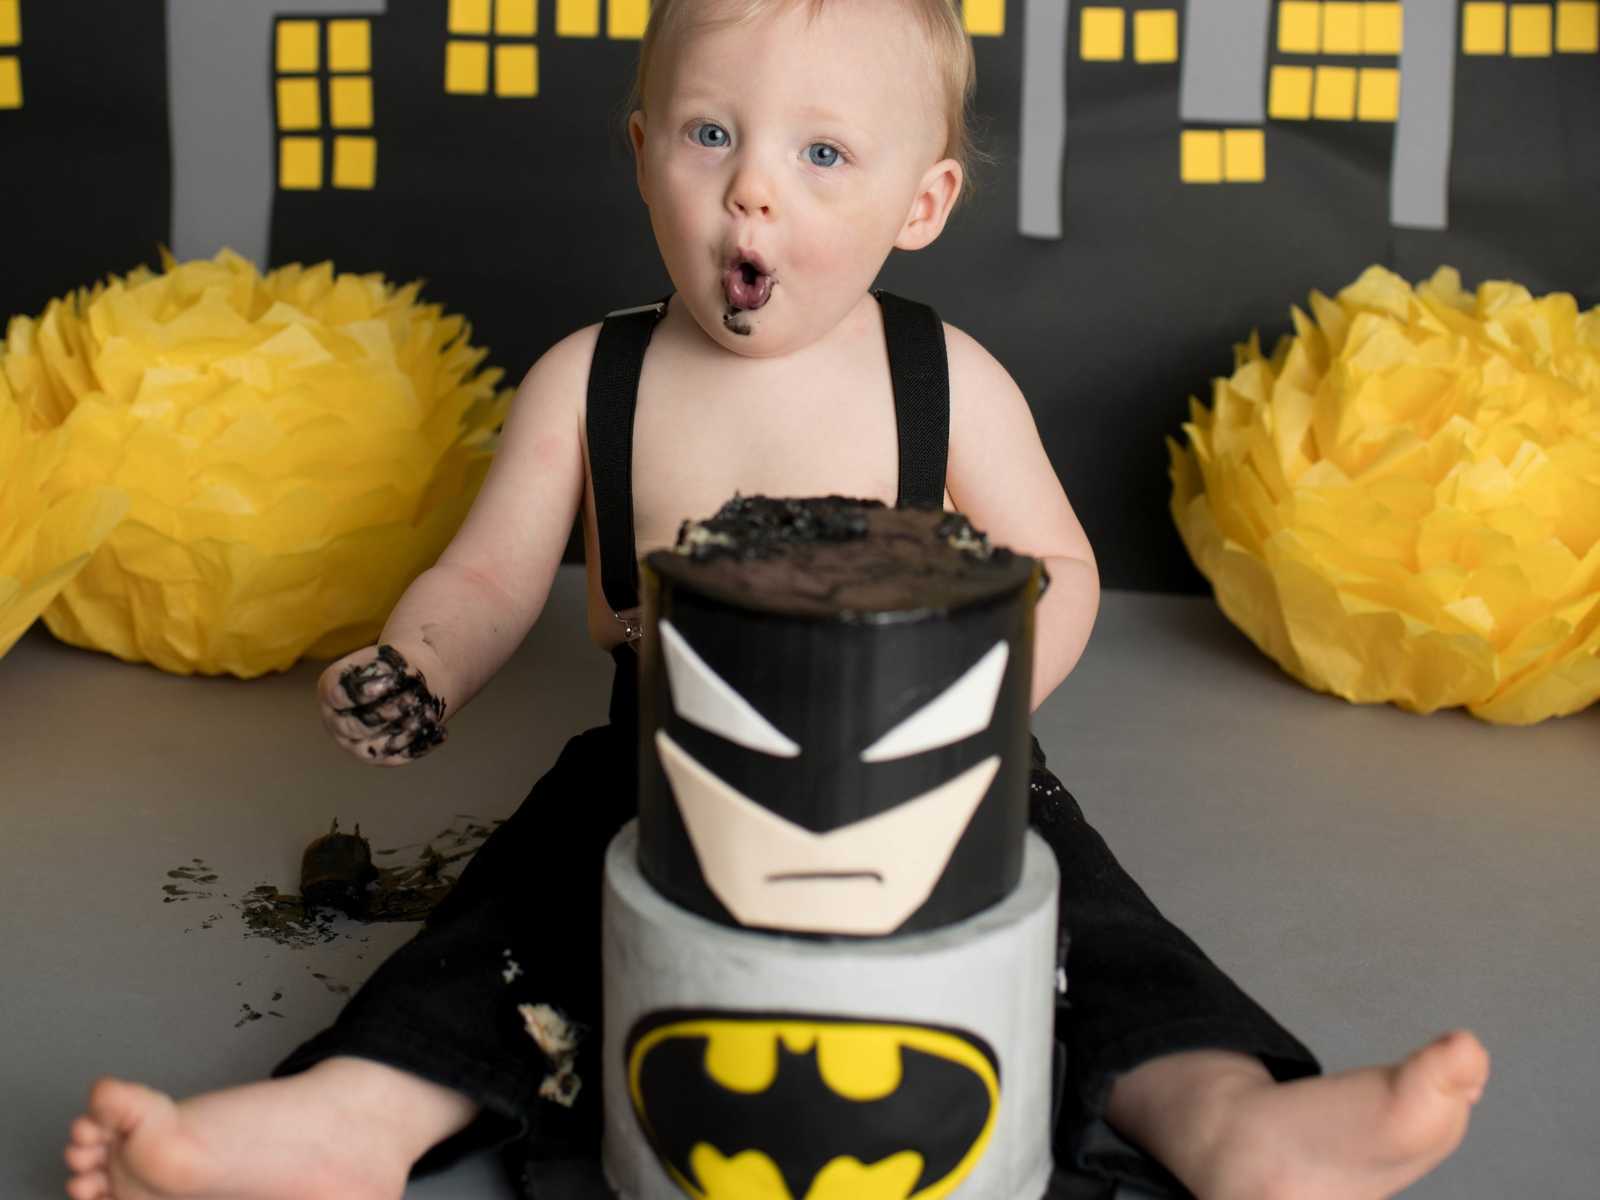 infant boy makes silly face while holding cake in his hand sitting behind batman batman cake